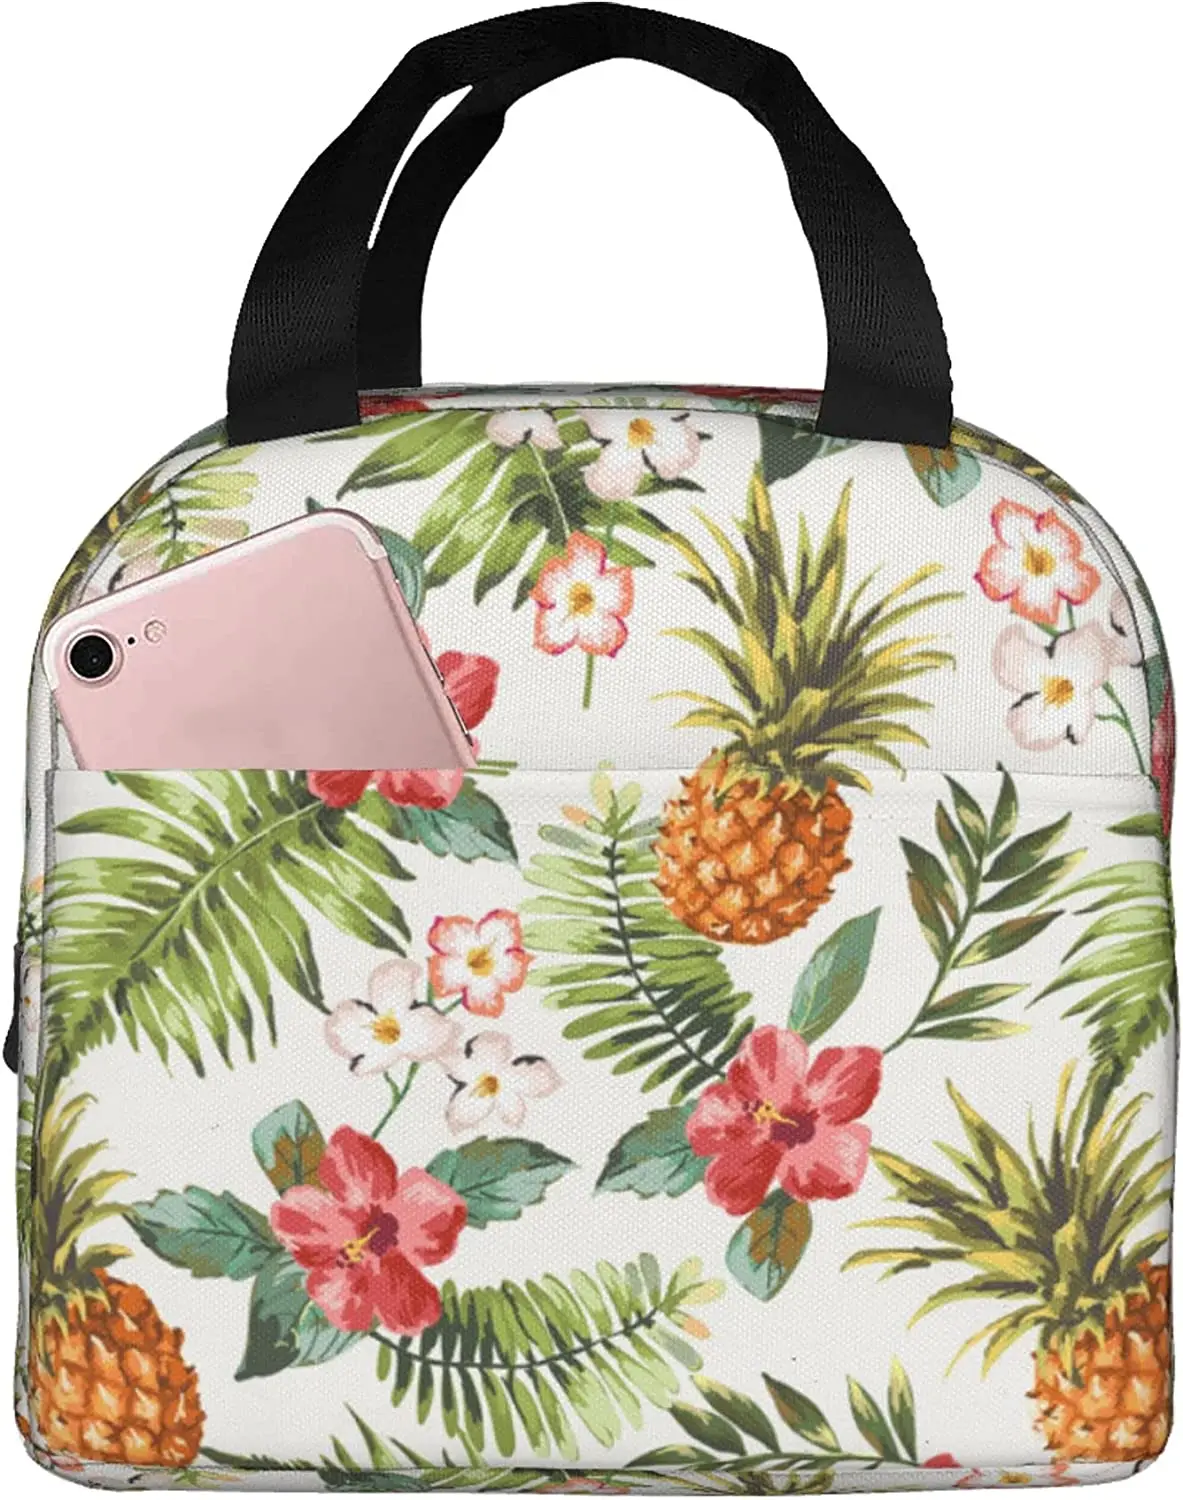 

Hawaiian Tropical Pineapple Lunch Bags for Women Insulated Lunch Box Cooler Thermal Tote Bag for Work School Hiking Picnic